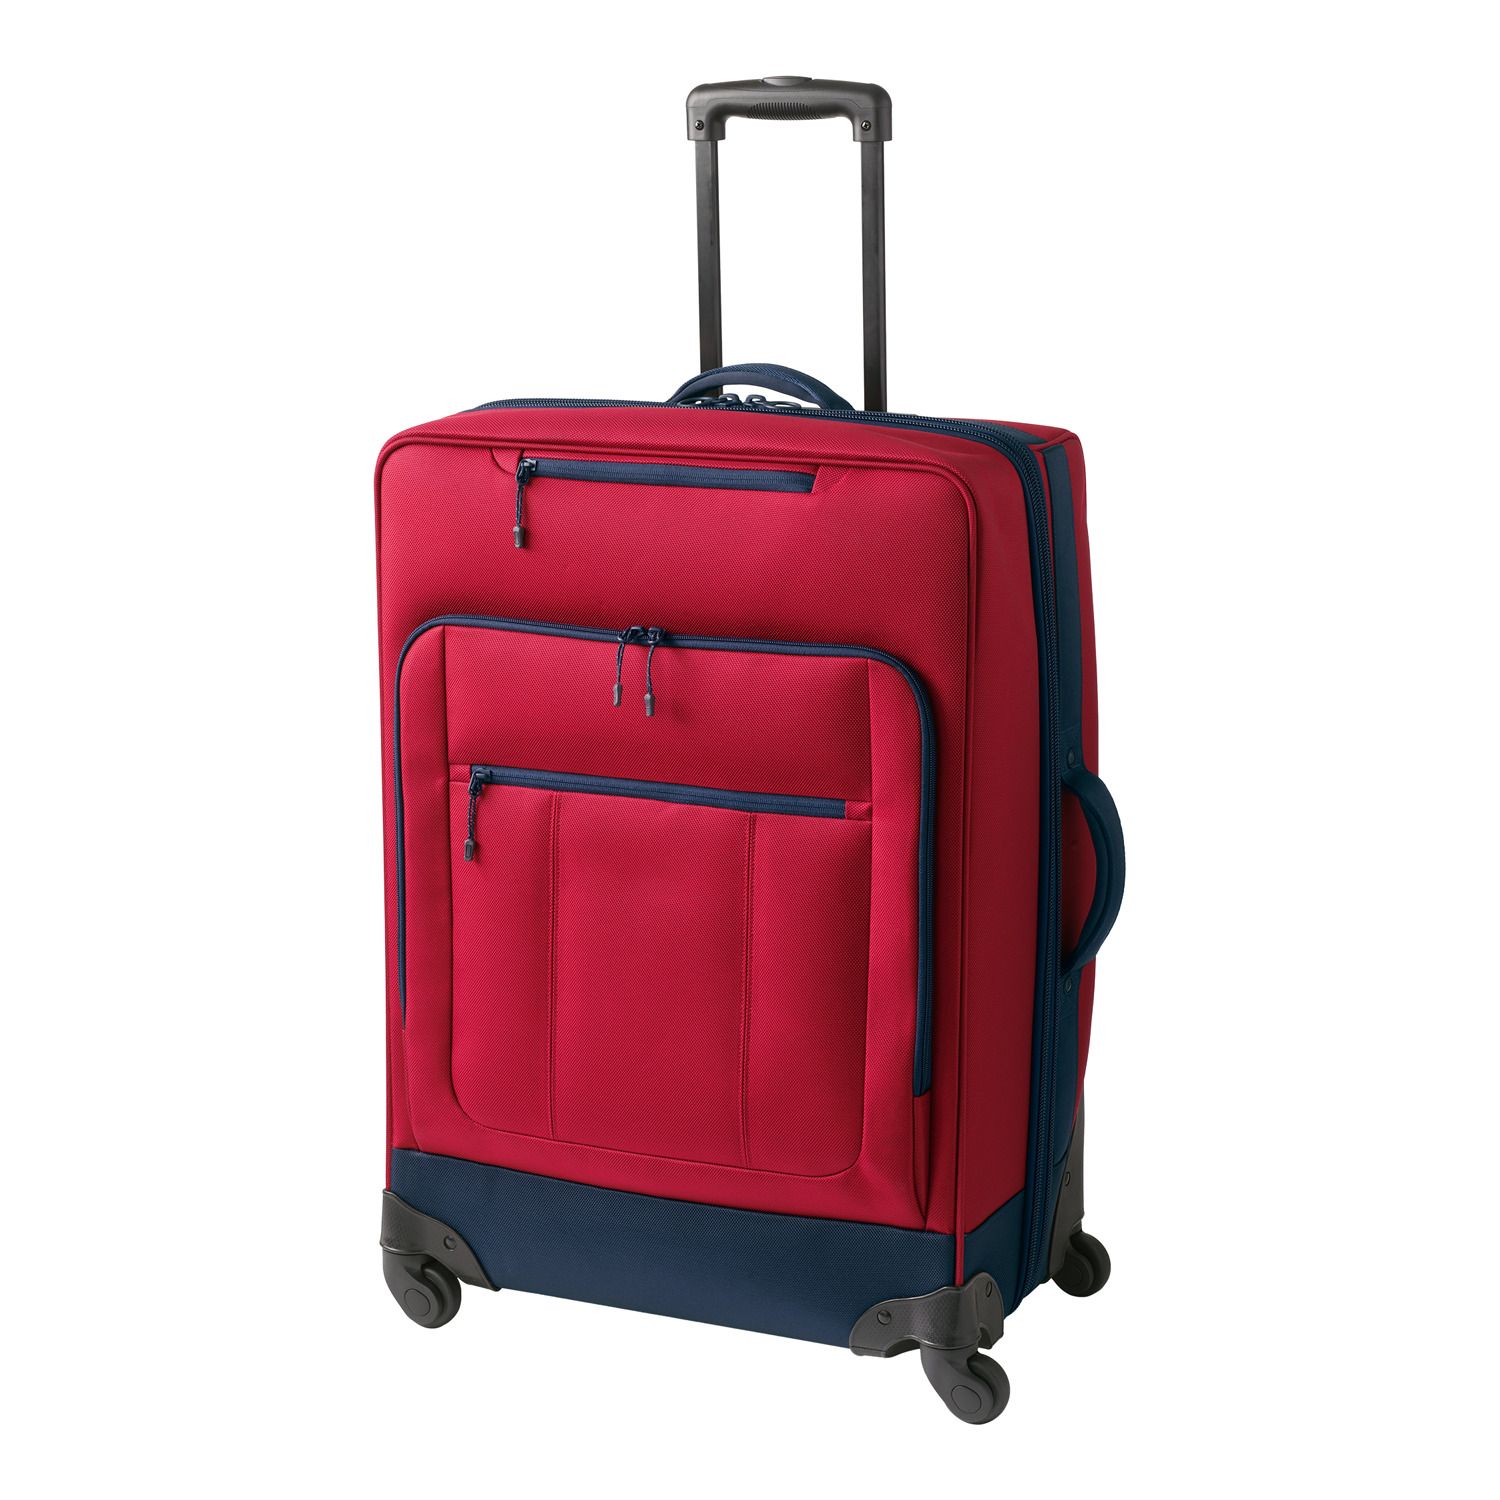 Image for Lands' End Travel Check-In Softside Spinner Luggage at Kohl's.